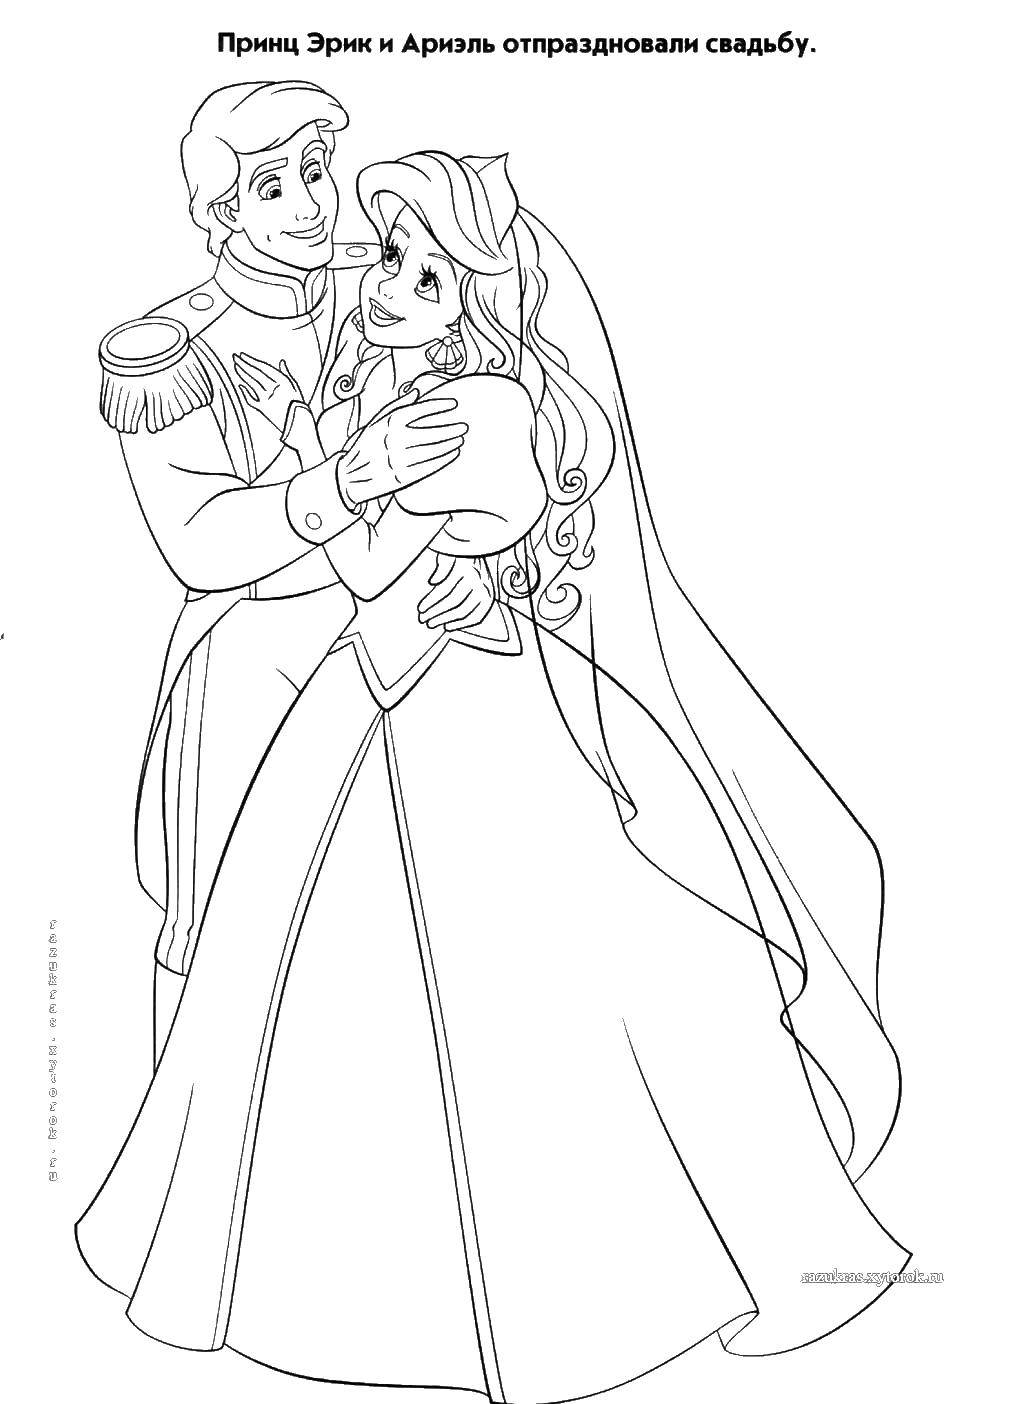 Coloring The wedding of Prince Eric and Ariel. Category wedding. Tags:  wedding, bride, groom, Prince Eric, Ariel.